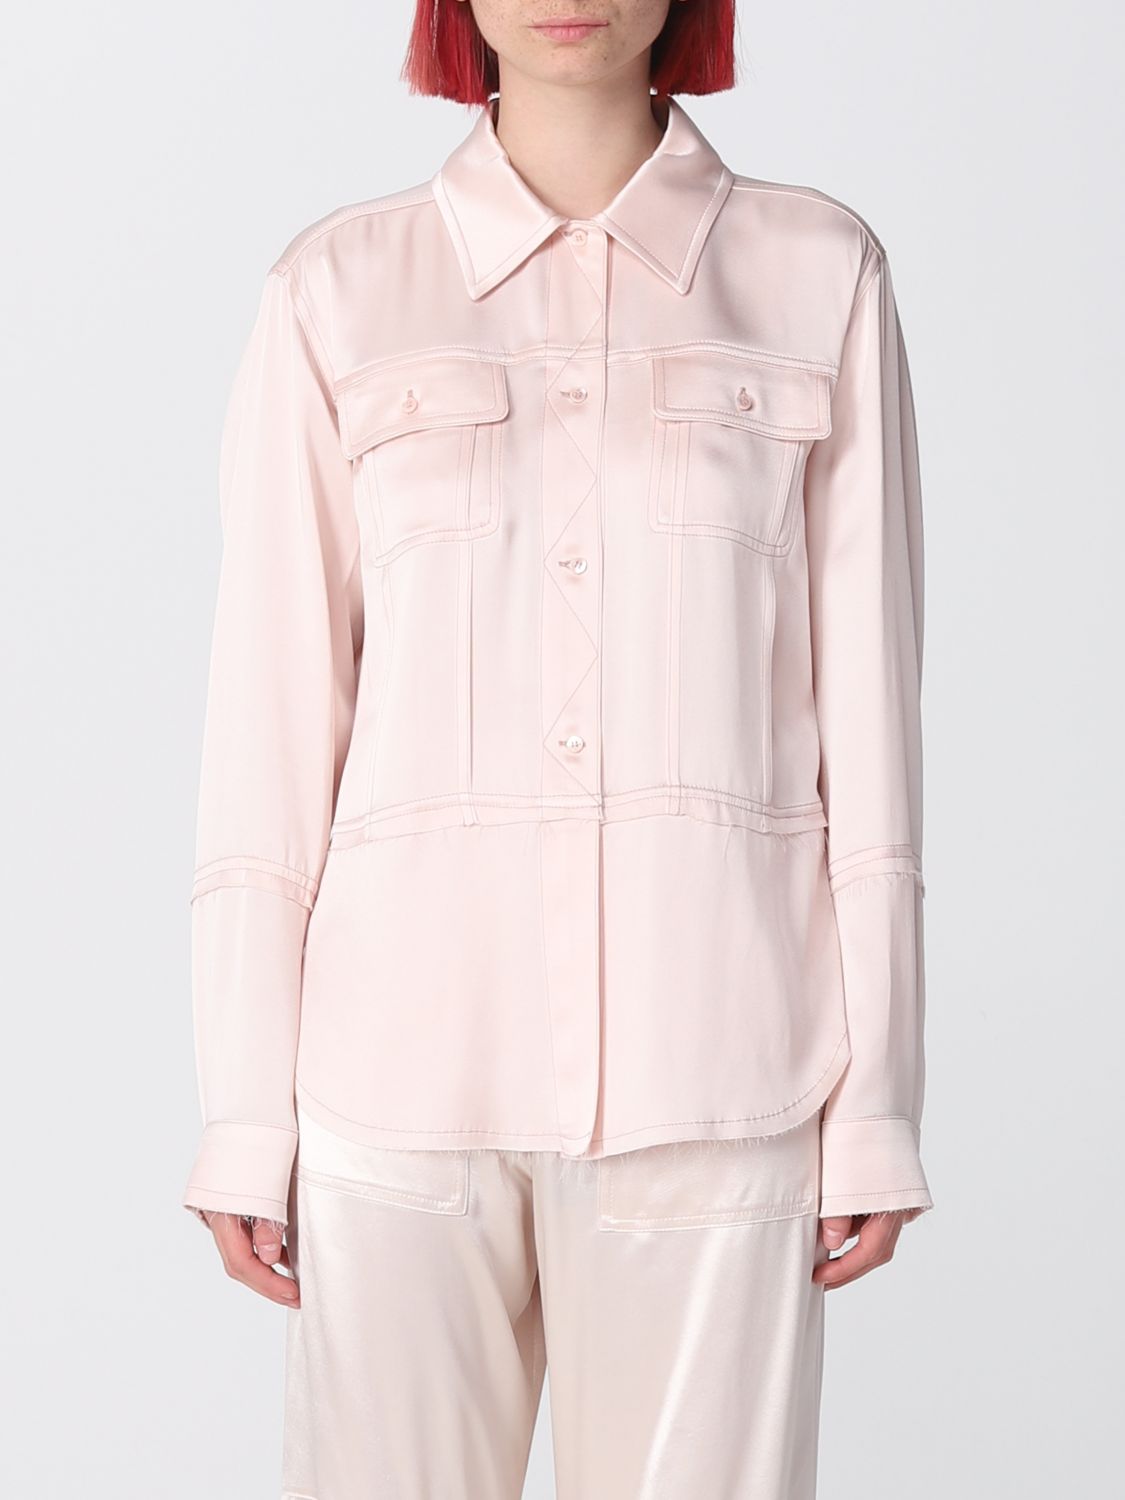 TOM FORD SHIRT TOM FORD WOMAN COLOR PINK,E42674010